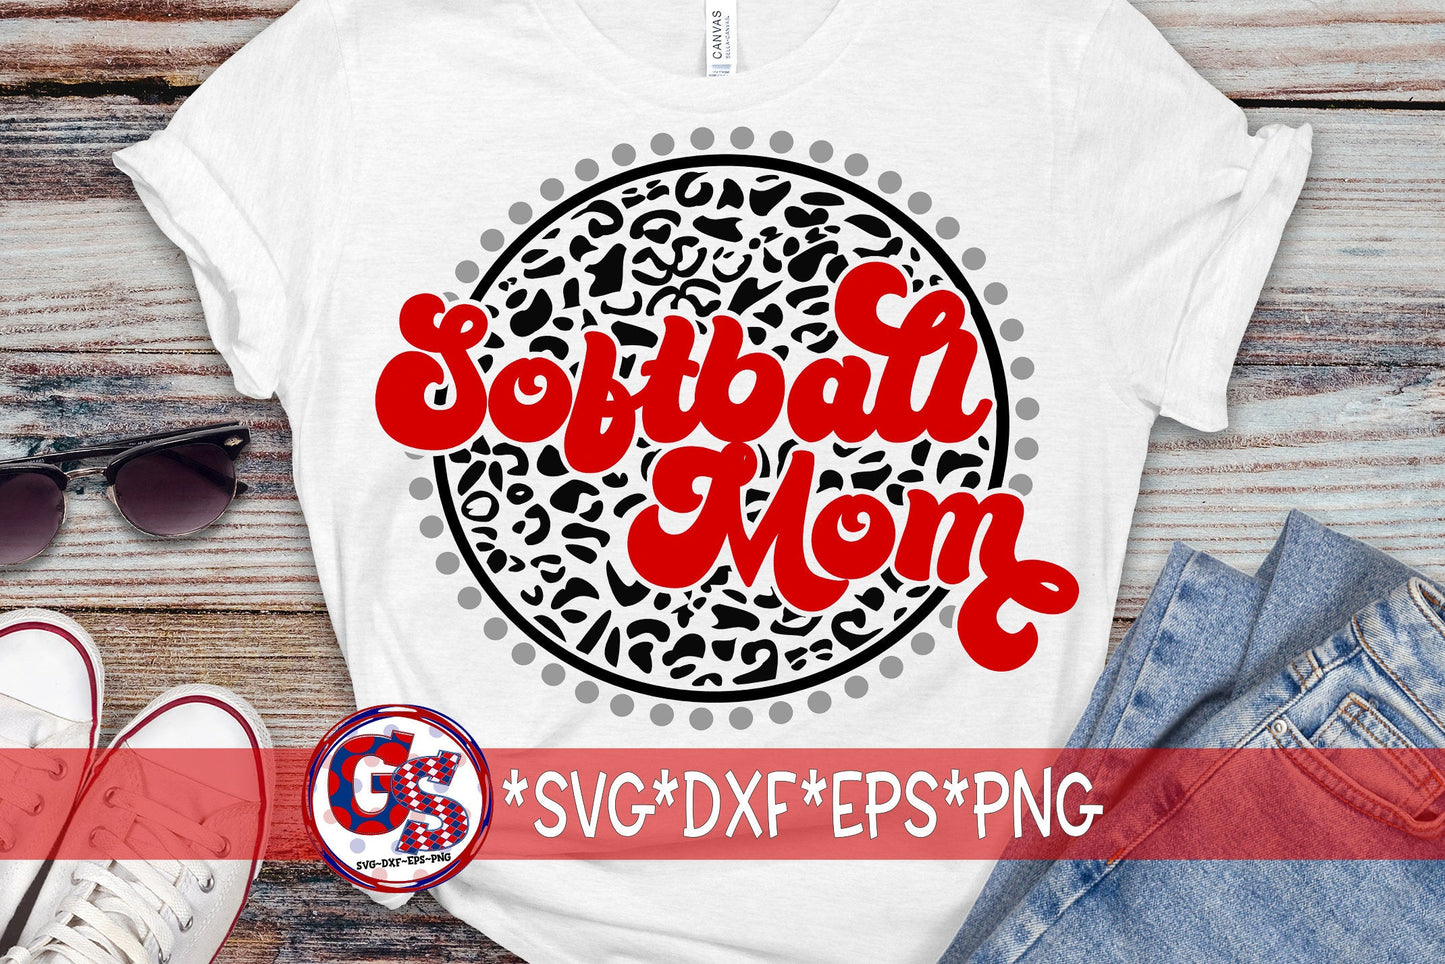 Softball Mom svg eps dxf png. Softball SvG | Softball Mom SvG | Softball Mom DxF | Mom SvG | Softball Mom EpS | Instant Download Cut Files